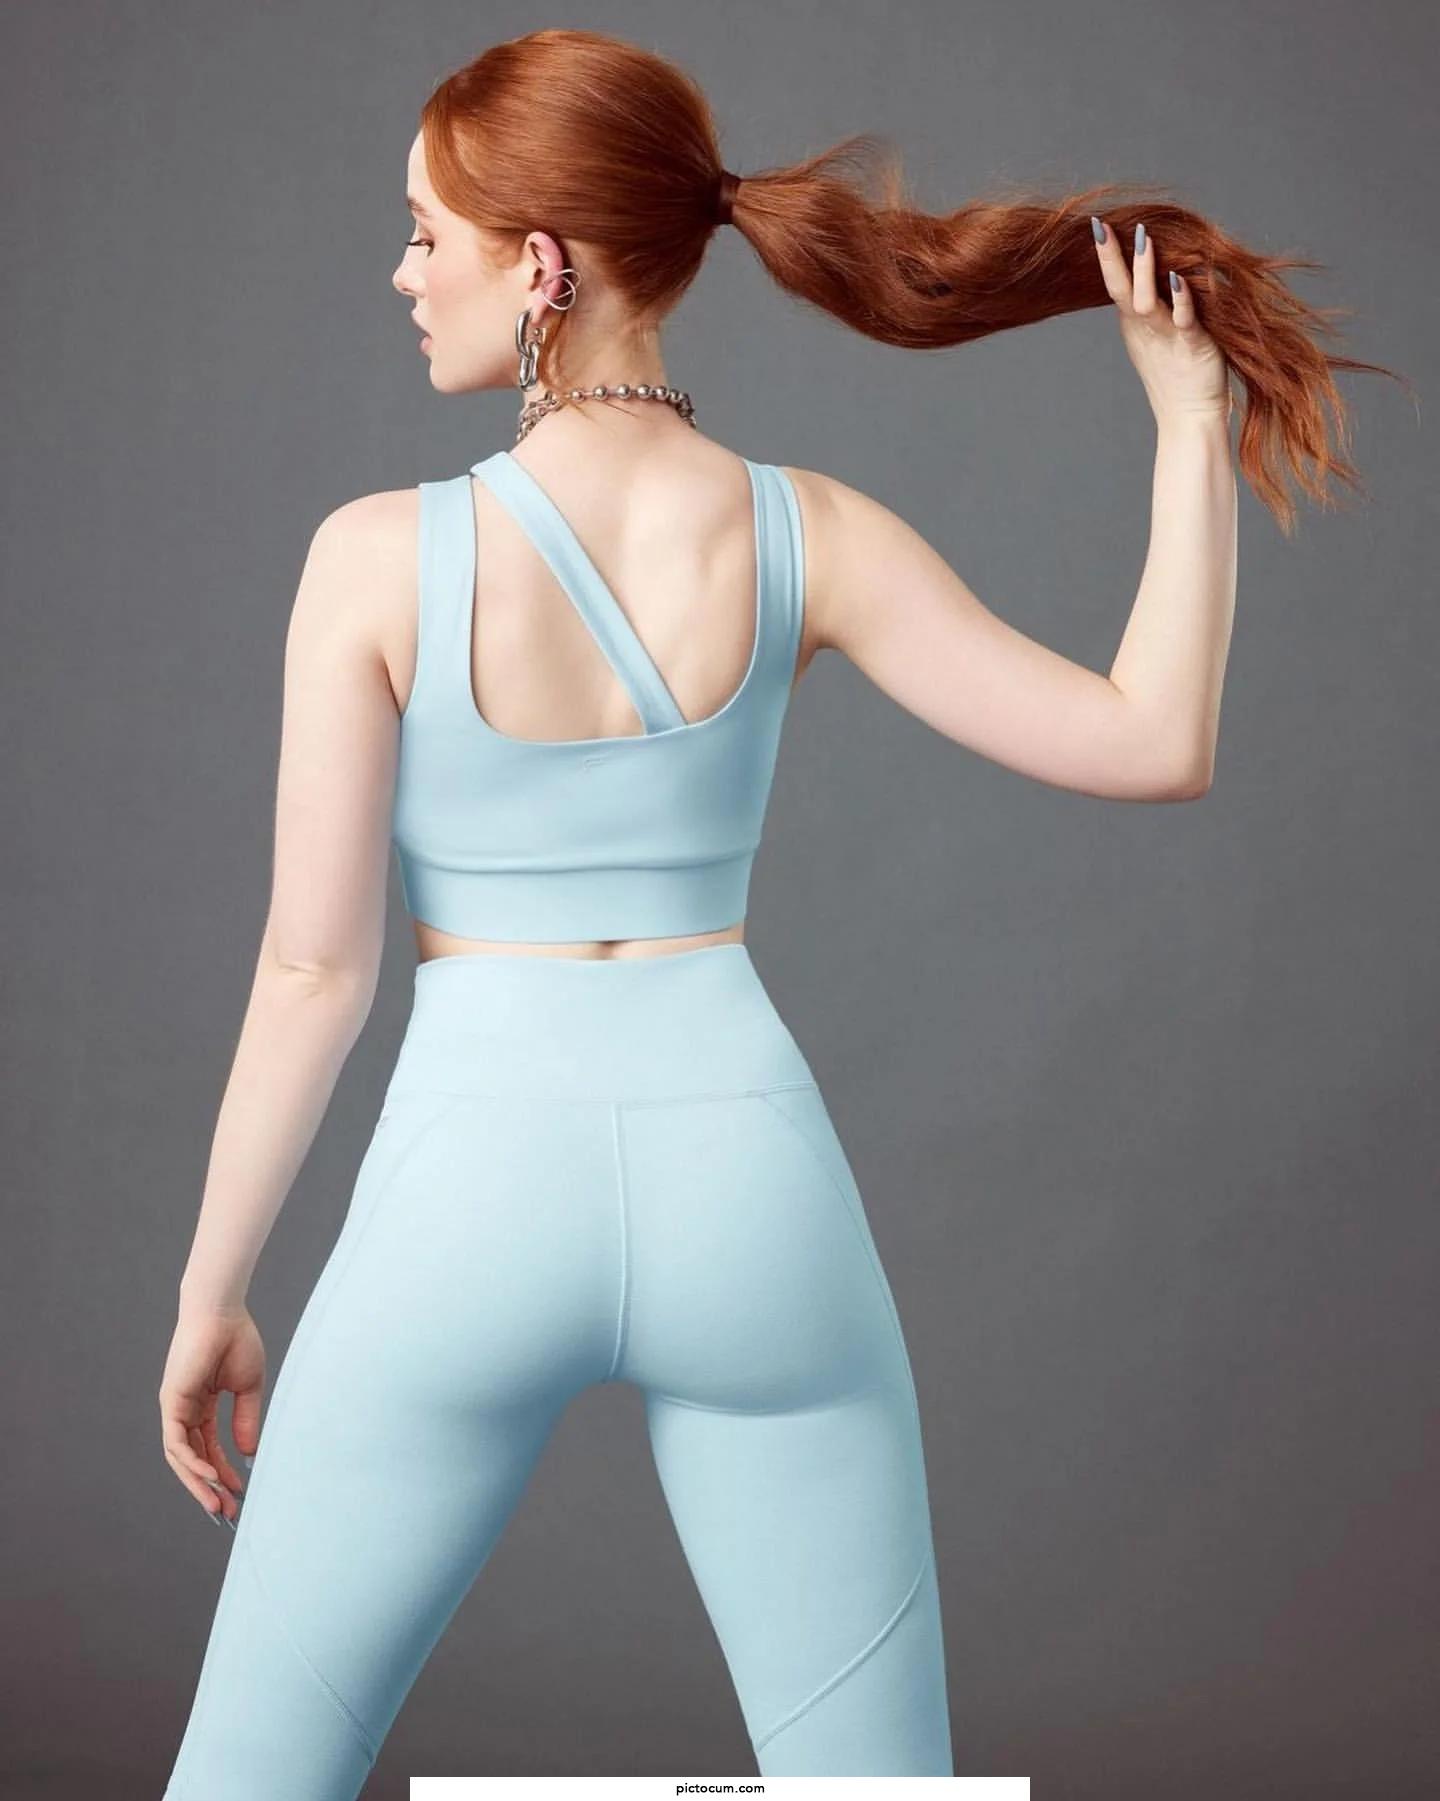 Madelaine Petsch's Ass is made for Doggystyle